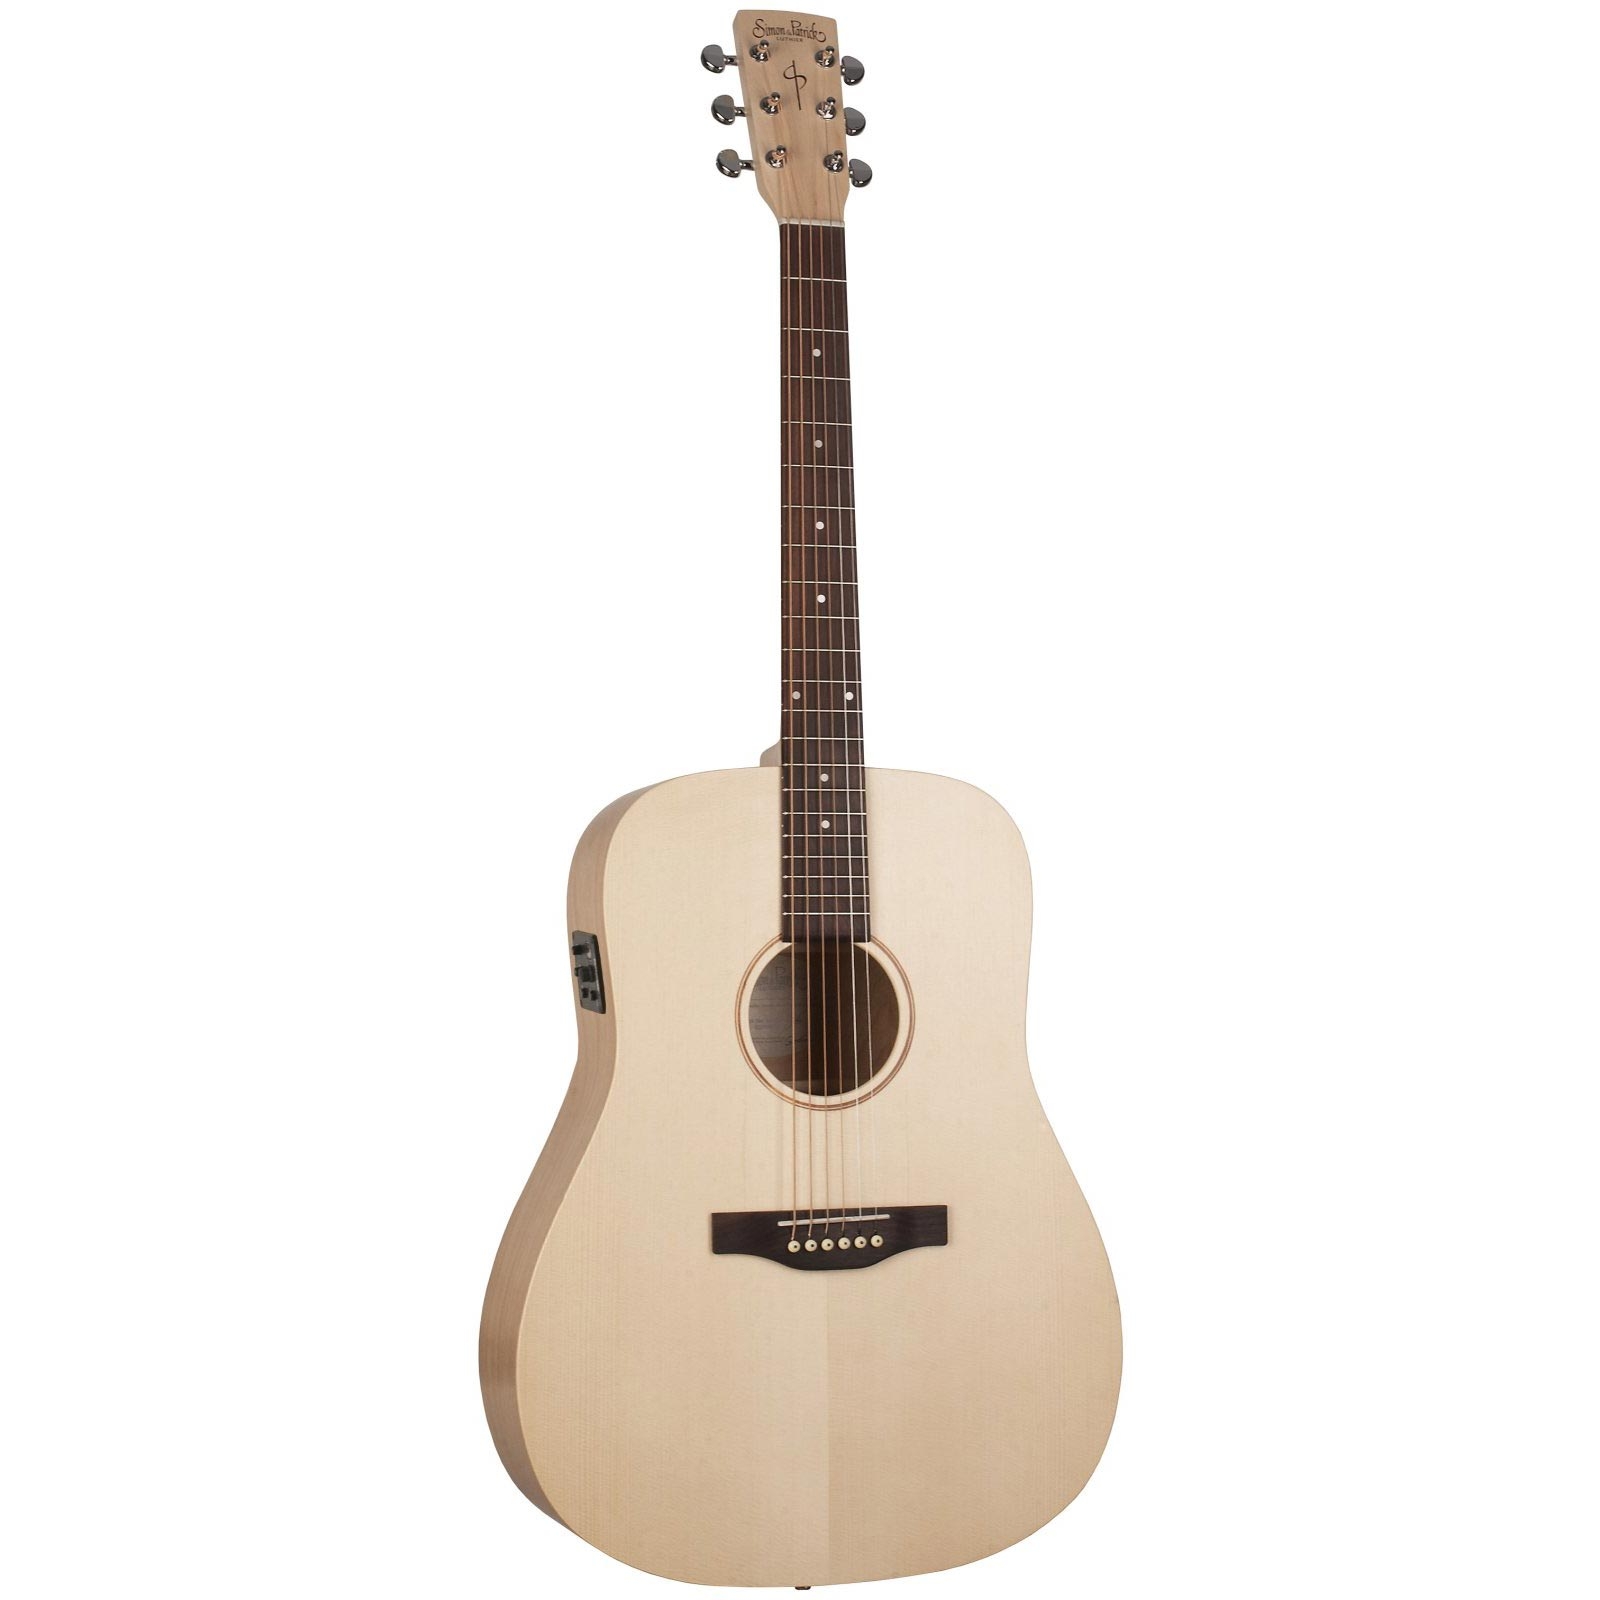 Simon & Patrick Trek Solid Spruce Natural Isyst